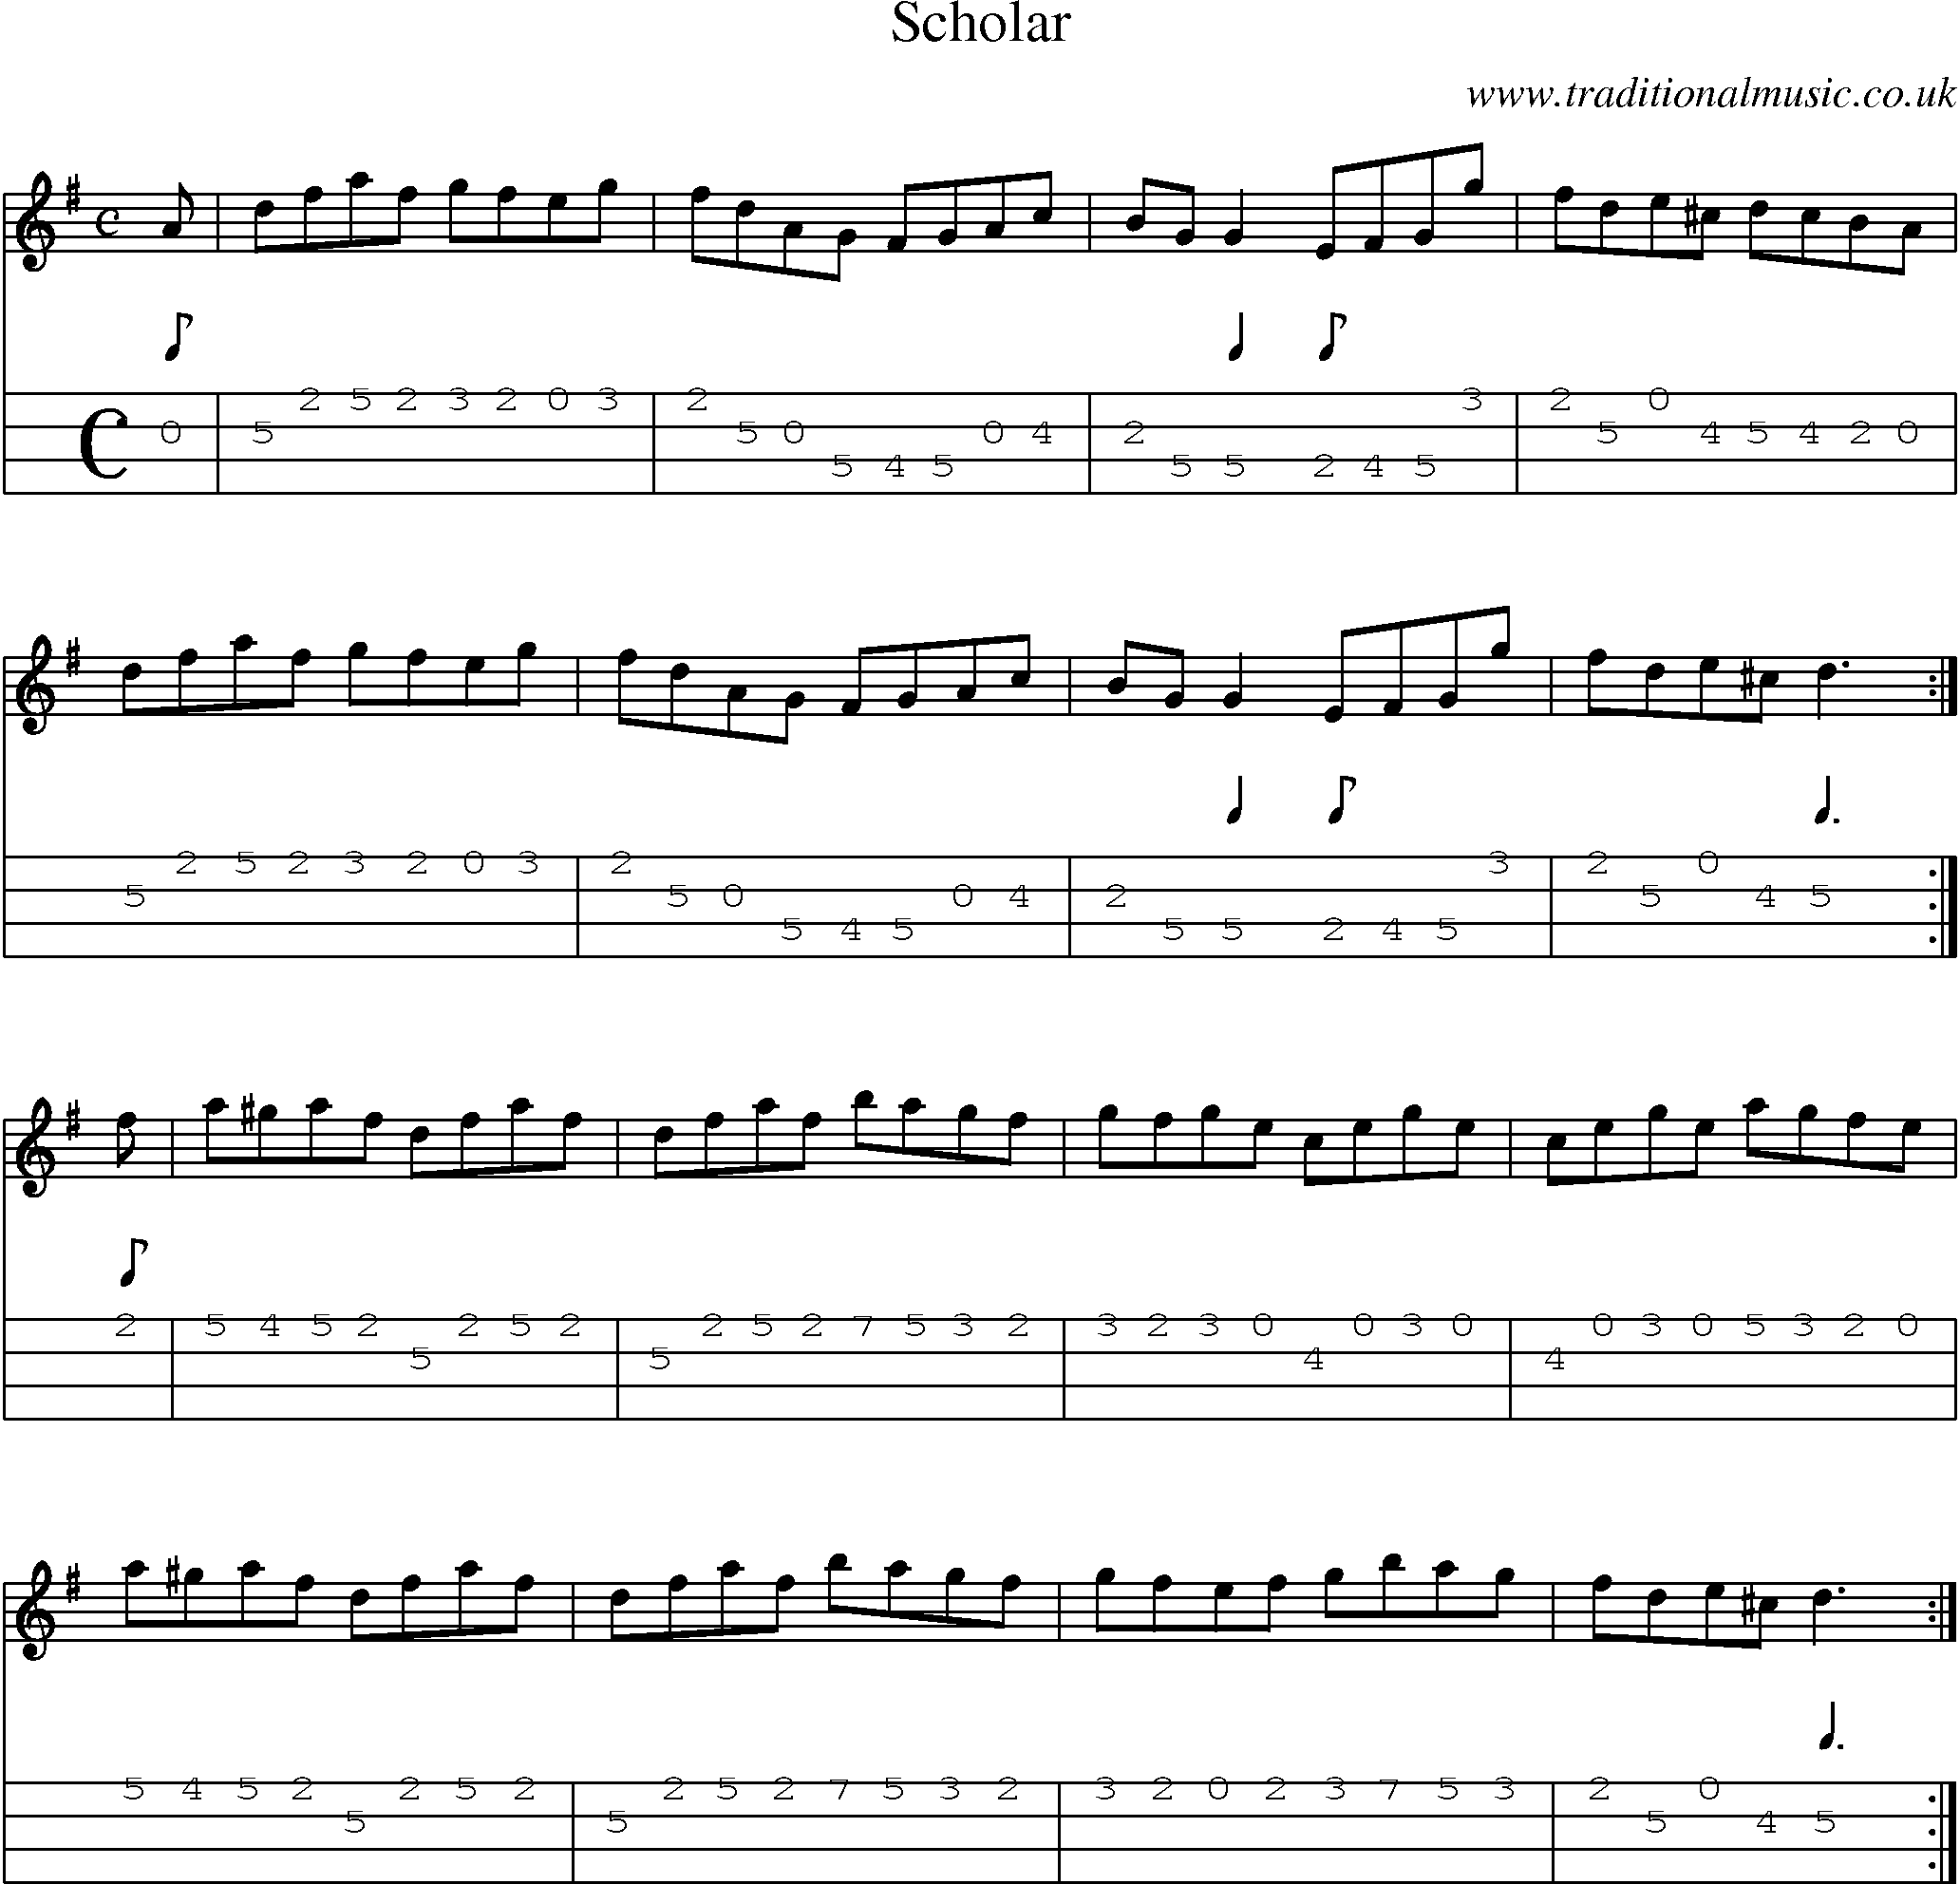 Music Score and Mandolin Tabs for Scholar